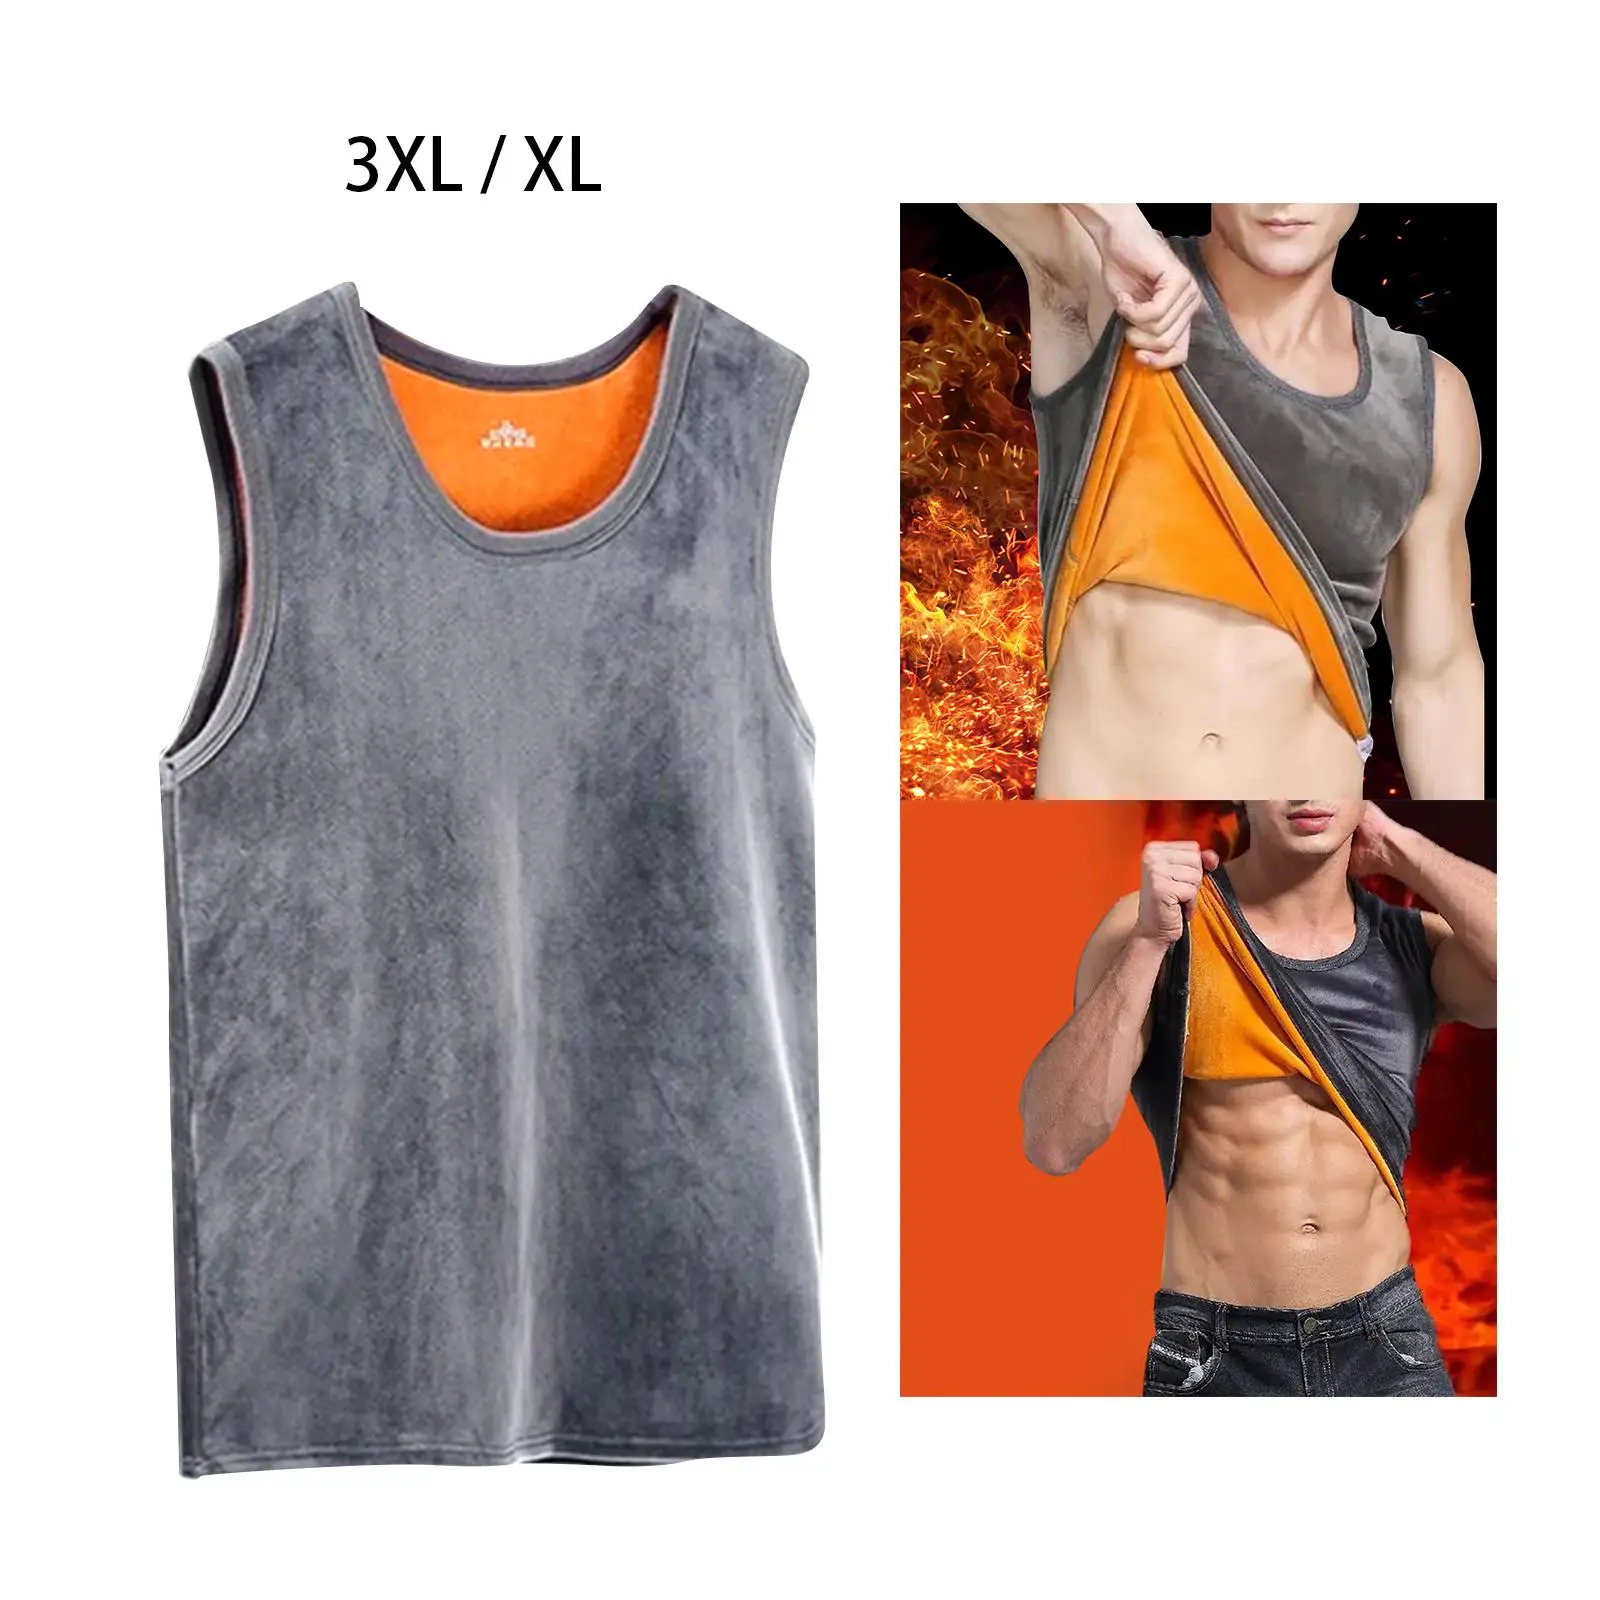 Mens Winter Vest Fleece Lined Comfortable Large Size Seamless Sleeveless Cold Proof Warm Tight Fitting Vest Tank Top